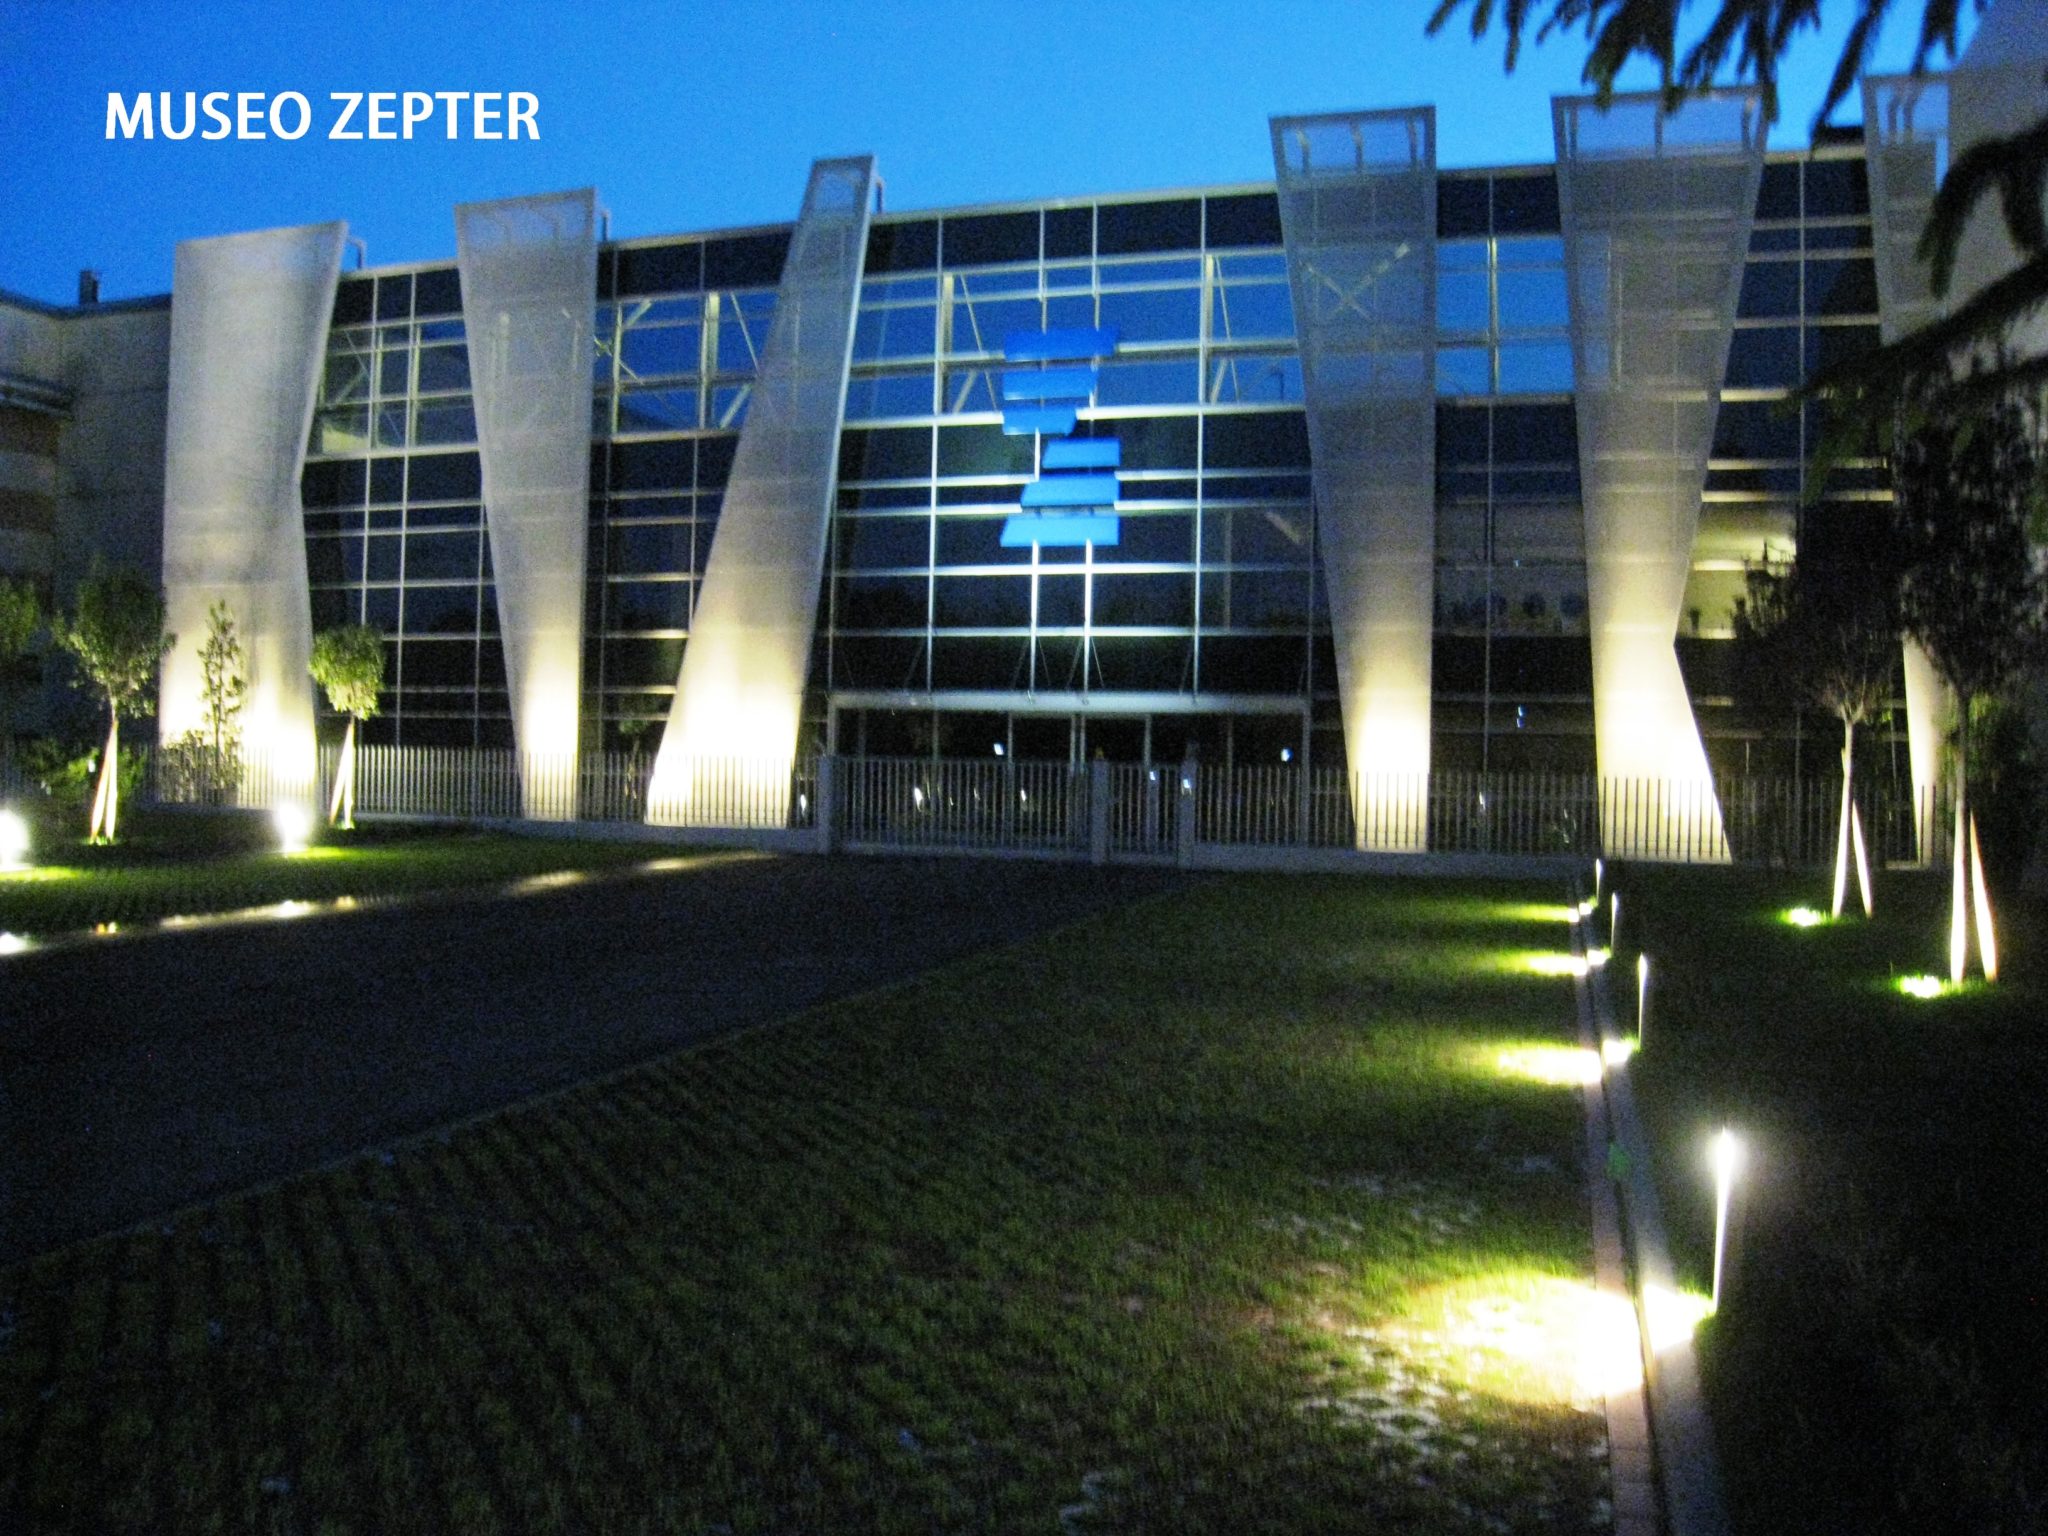 Museo Zepter